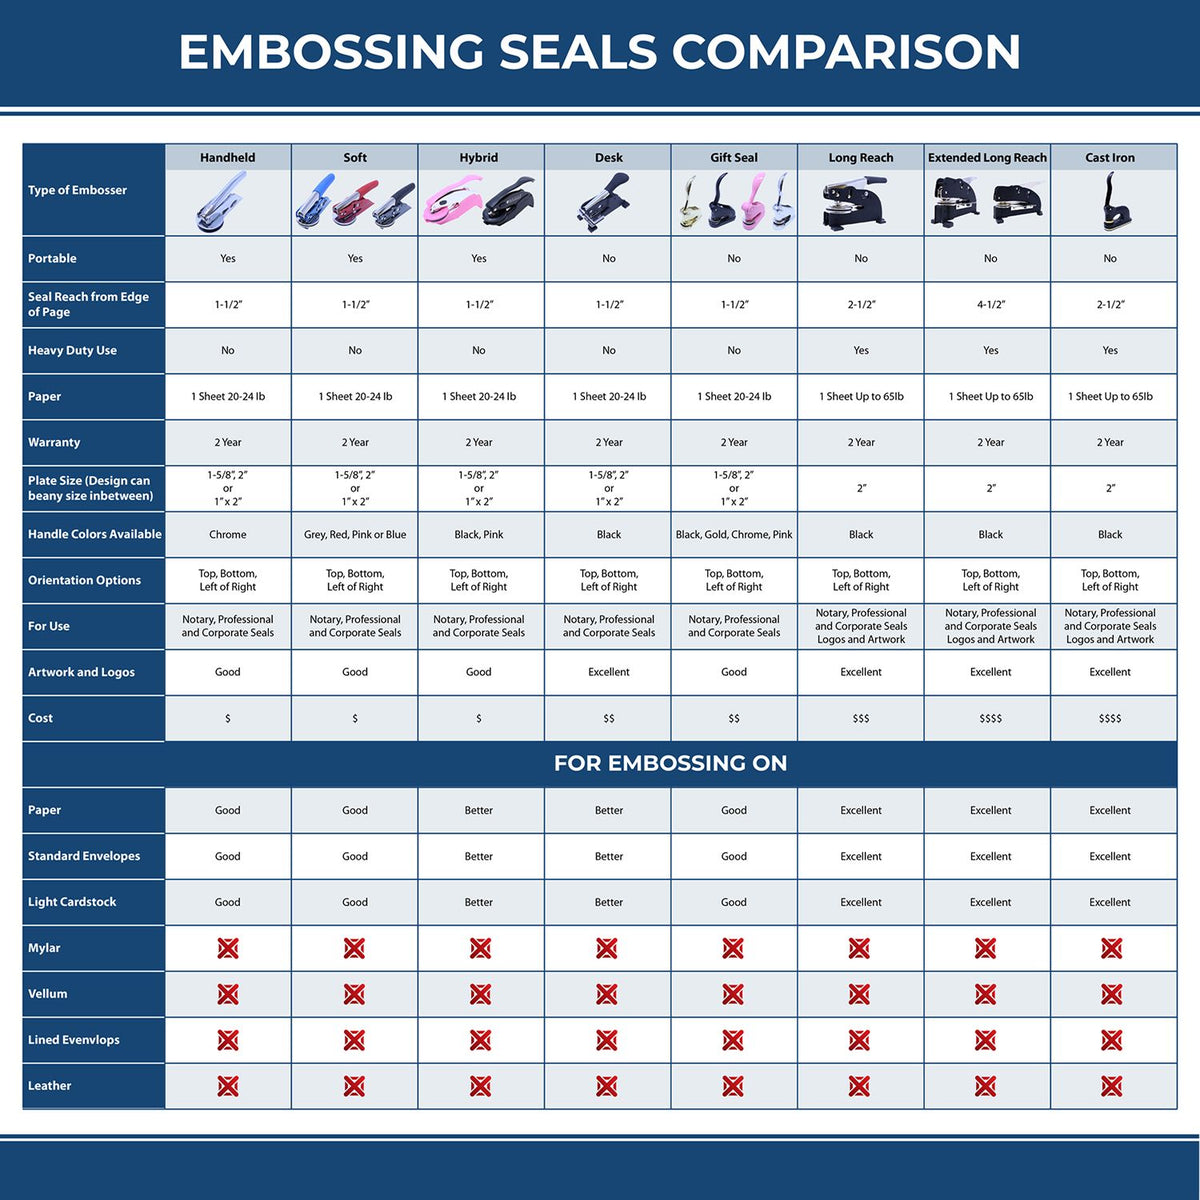 A comparison chart for the different types of mount models available for the State of Louisiana Long Reach Architectural Embossing Seal.